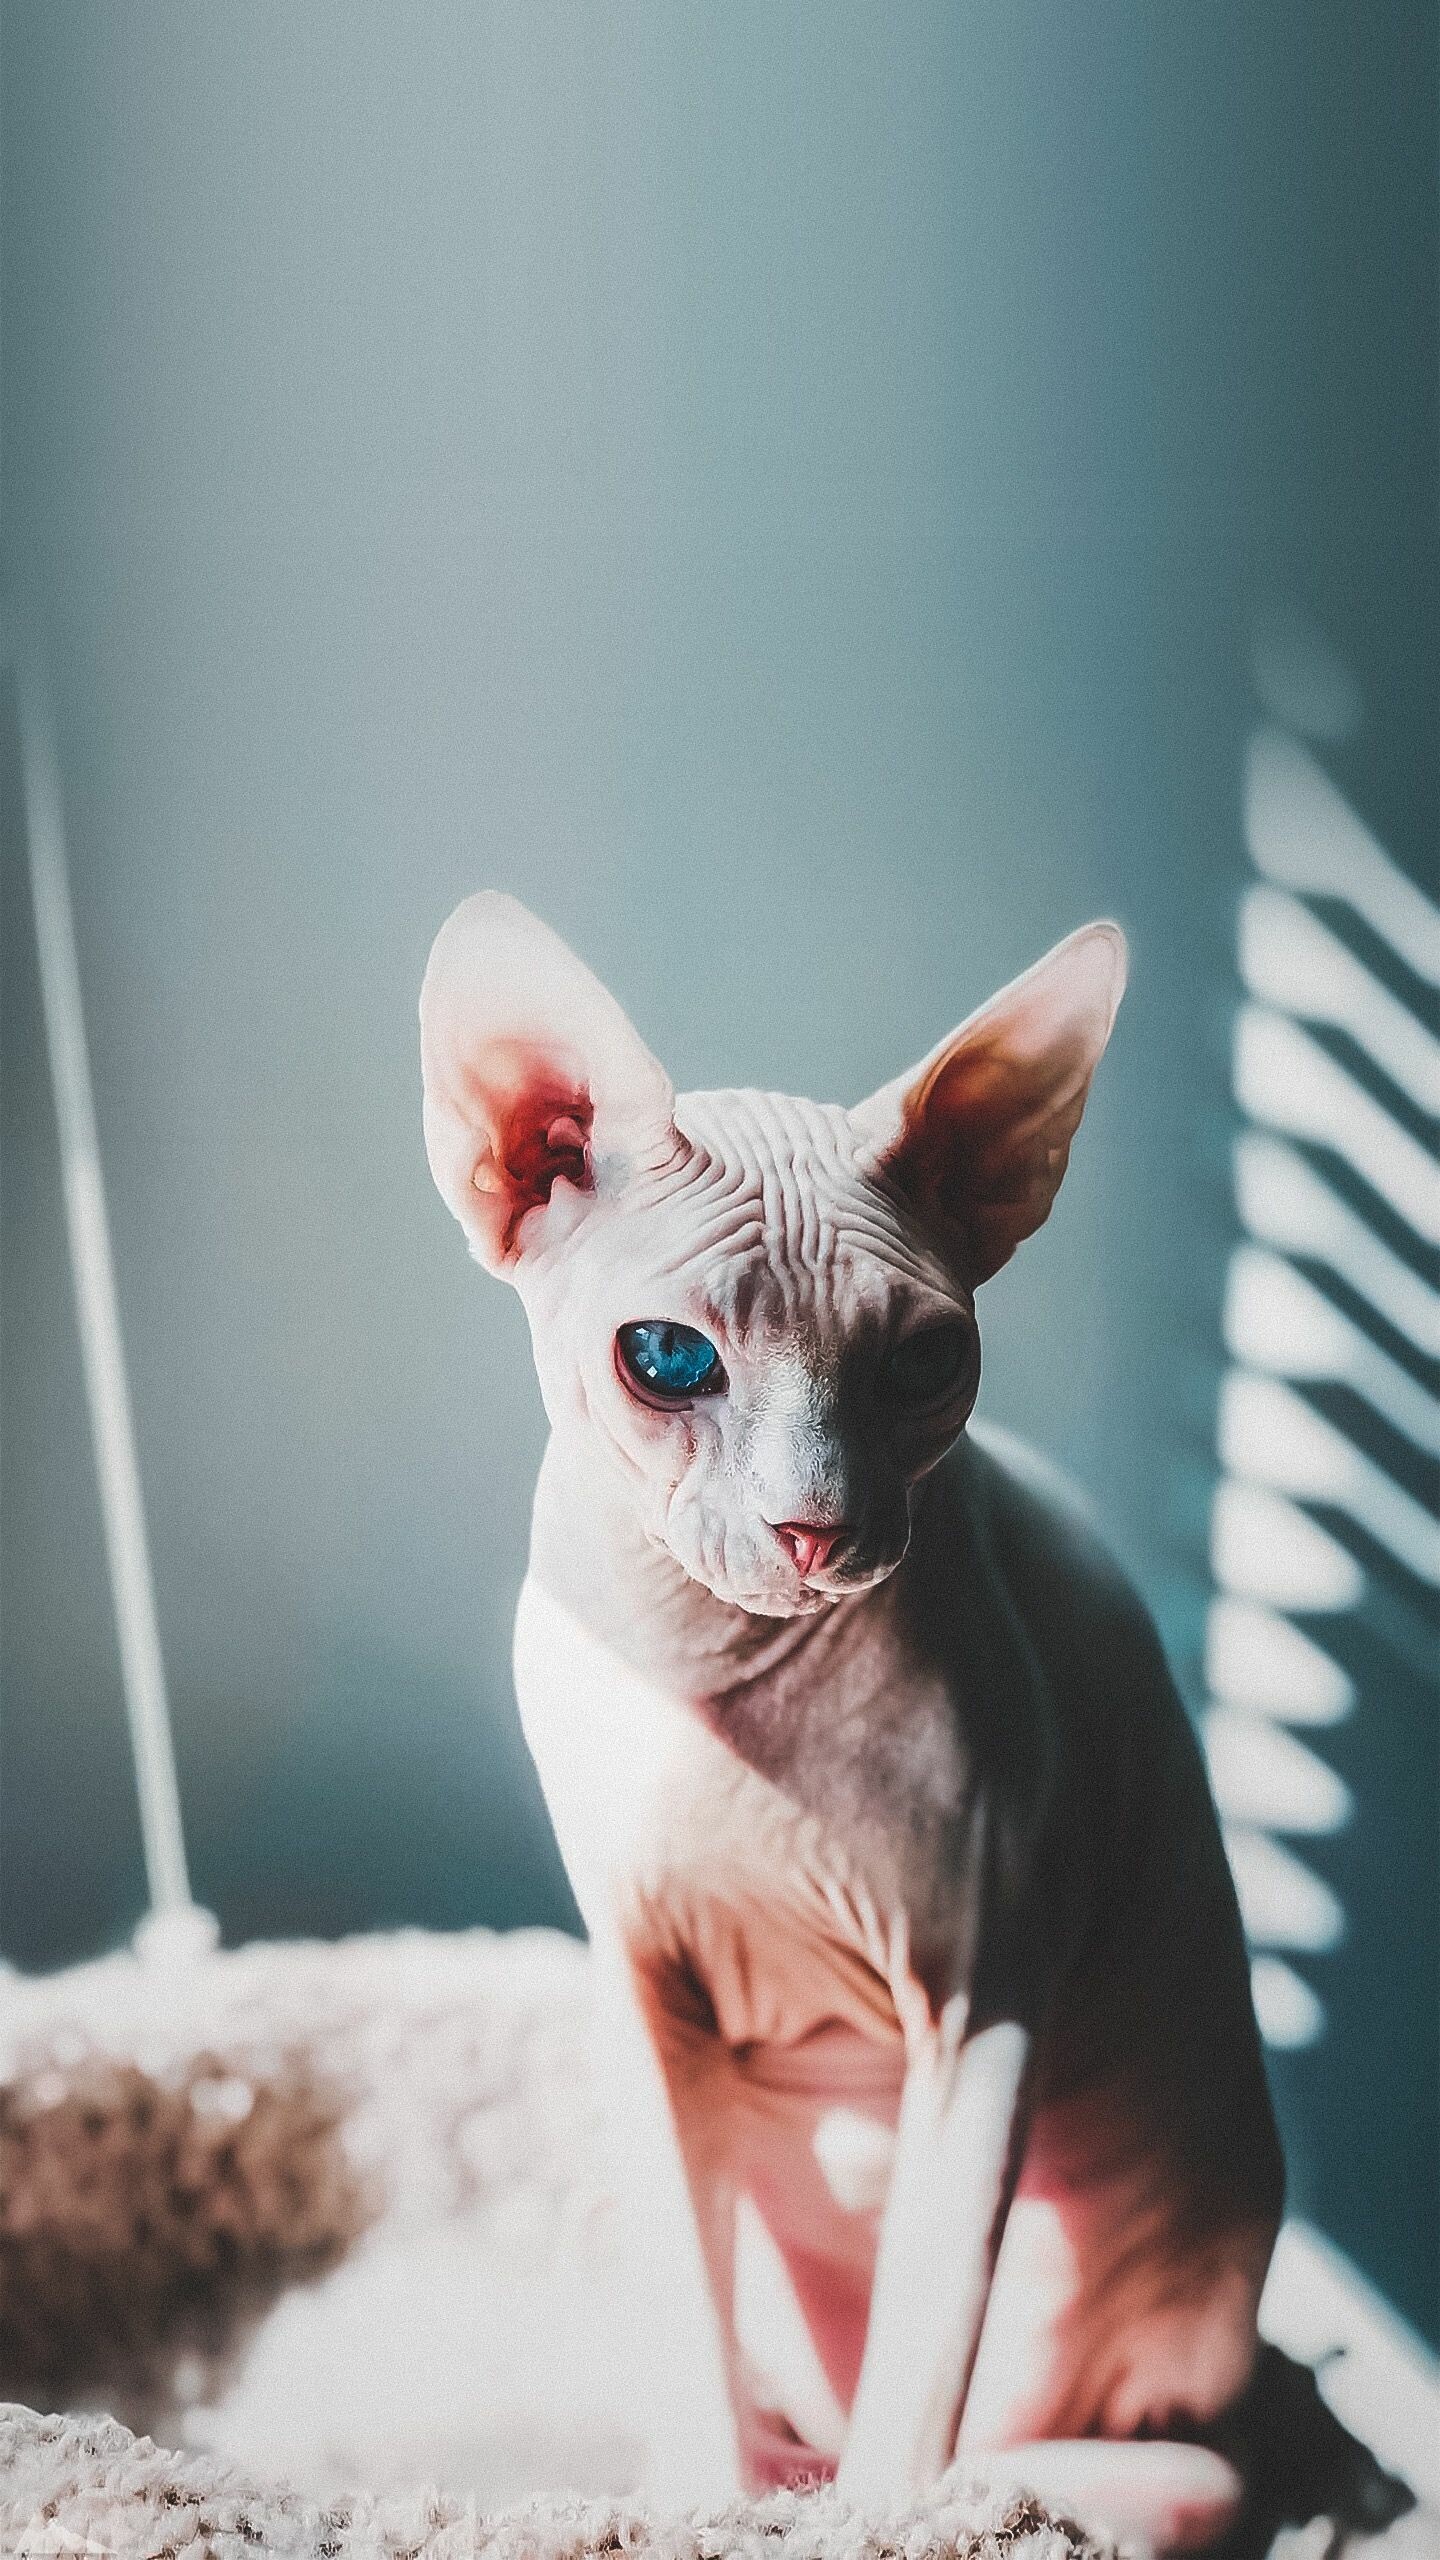 Sphynx: One of the more dog-like breeds of cats, frequently greeting their owners at the door and friendly when meeting strangers. 1440x2560 HD Wallpaper.